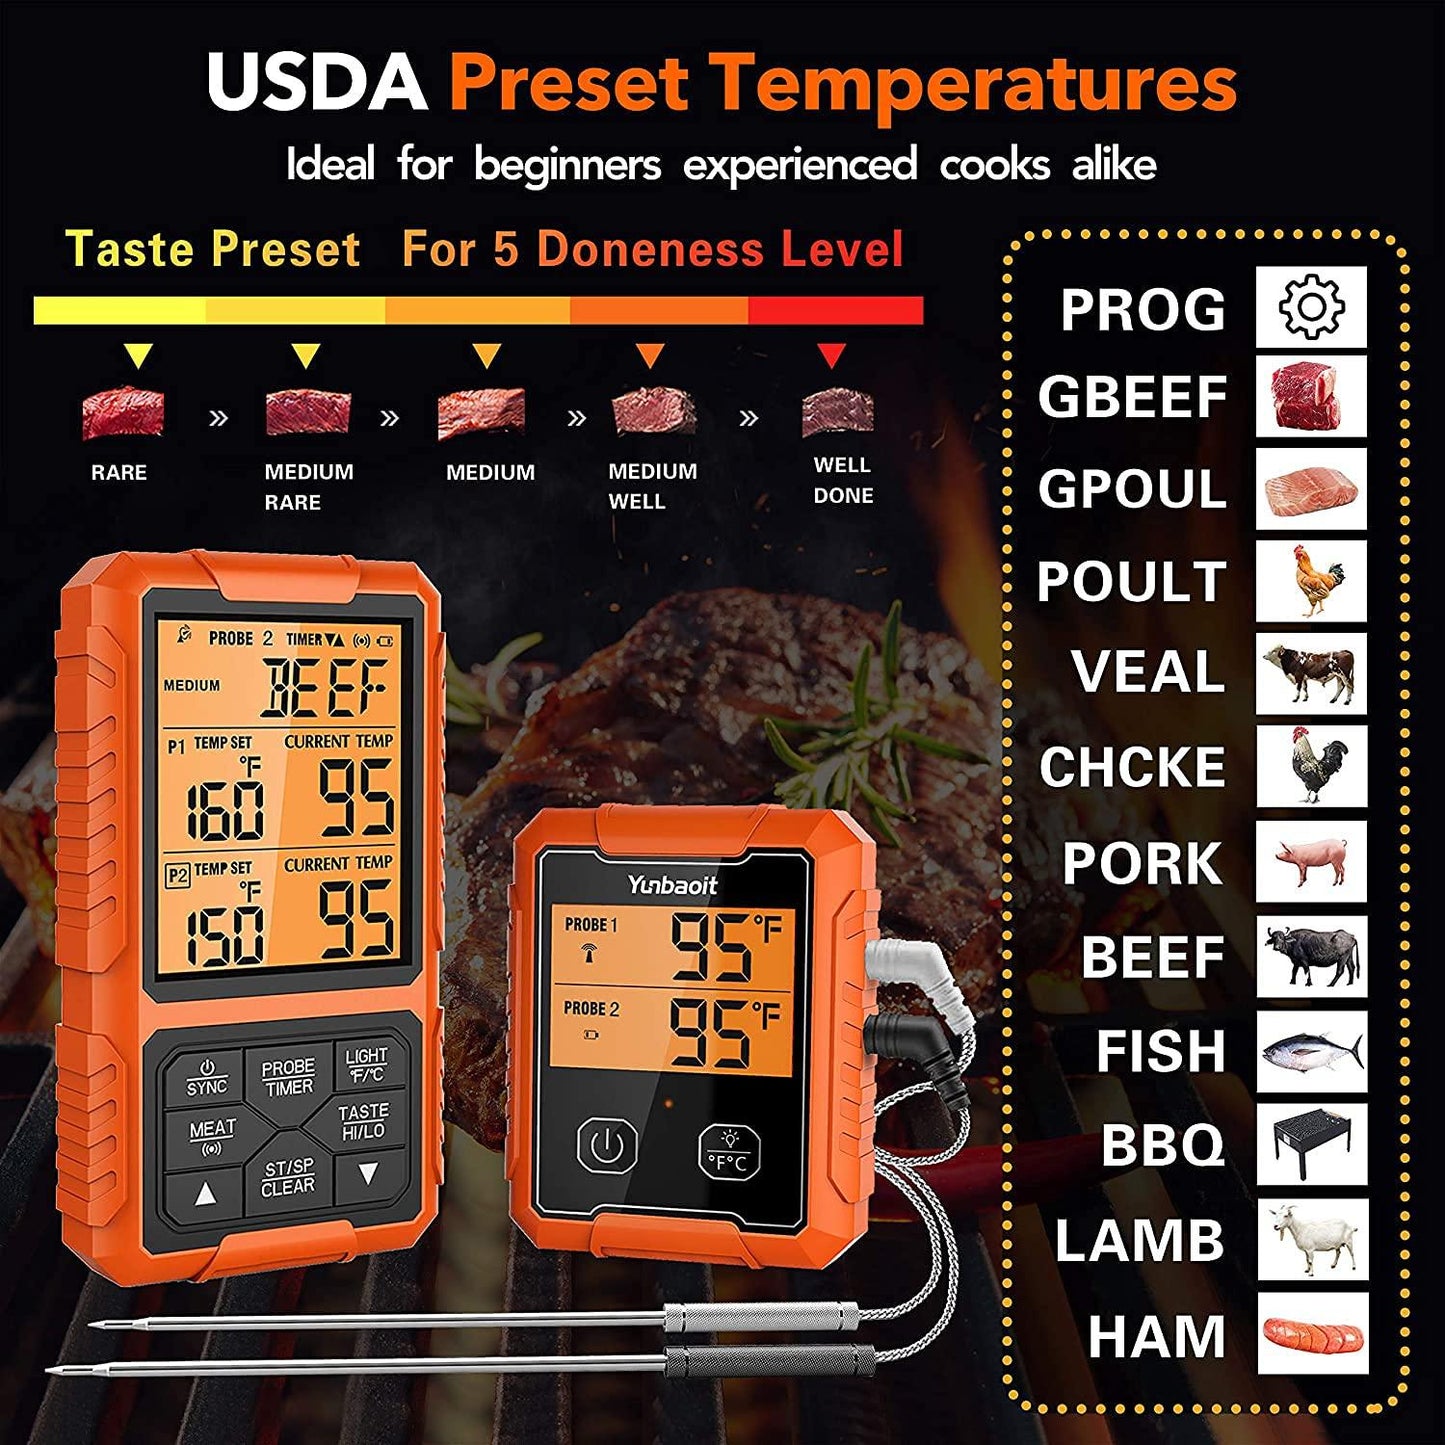 Yunbaoit Wireless Meat Thermometer, Digital Remote Food Cooking Meat Thermometer for BBQ Grill Smoker Oven Kitchen,500 FT Range&Dual Probes - CookCave